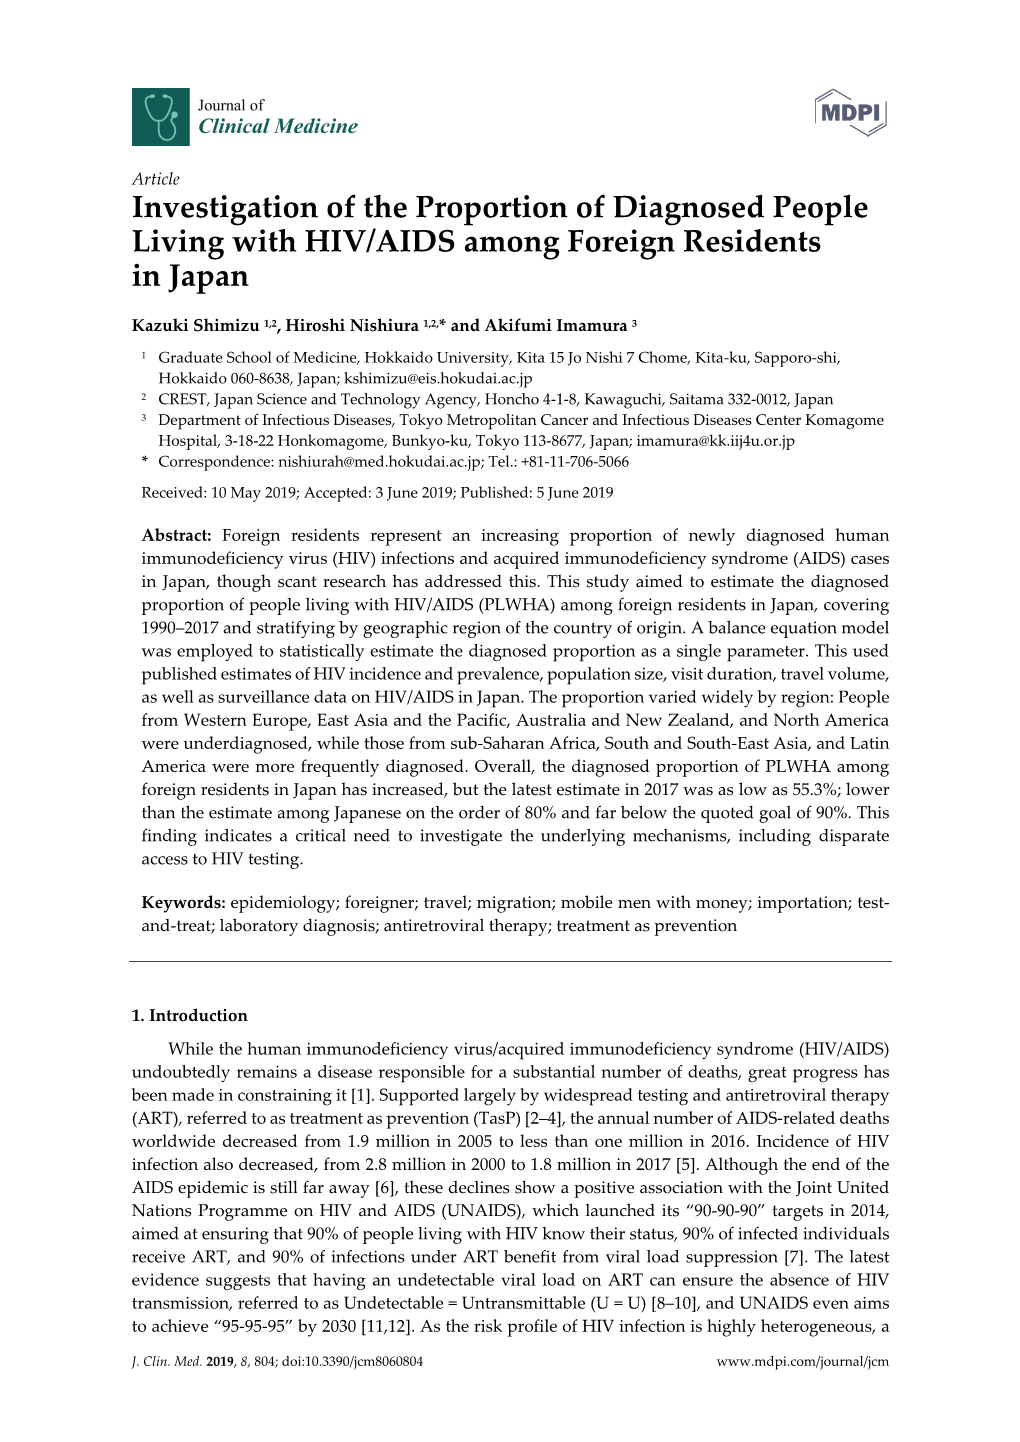 Investigation of the Proportion of Diagnosed People Living with HIV/AIDS Among Foreign Residents in Japan